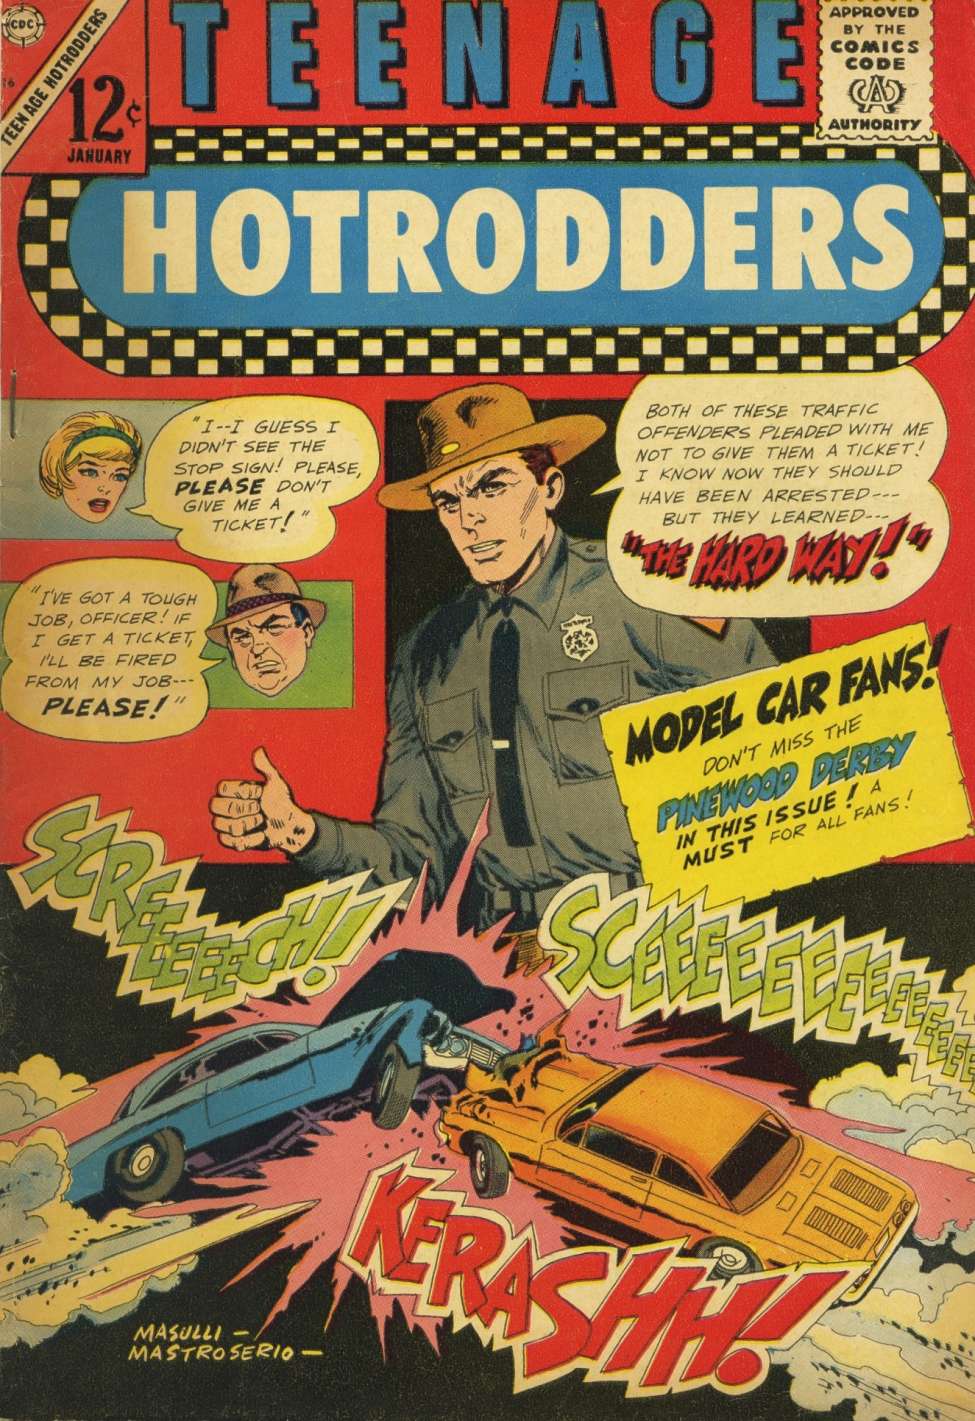 Book Cover For Teenage Hotrodders 16